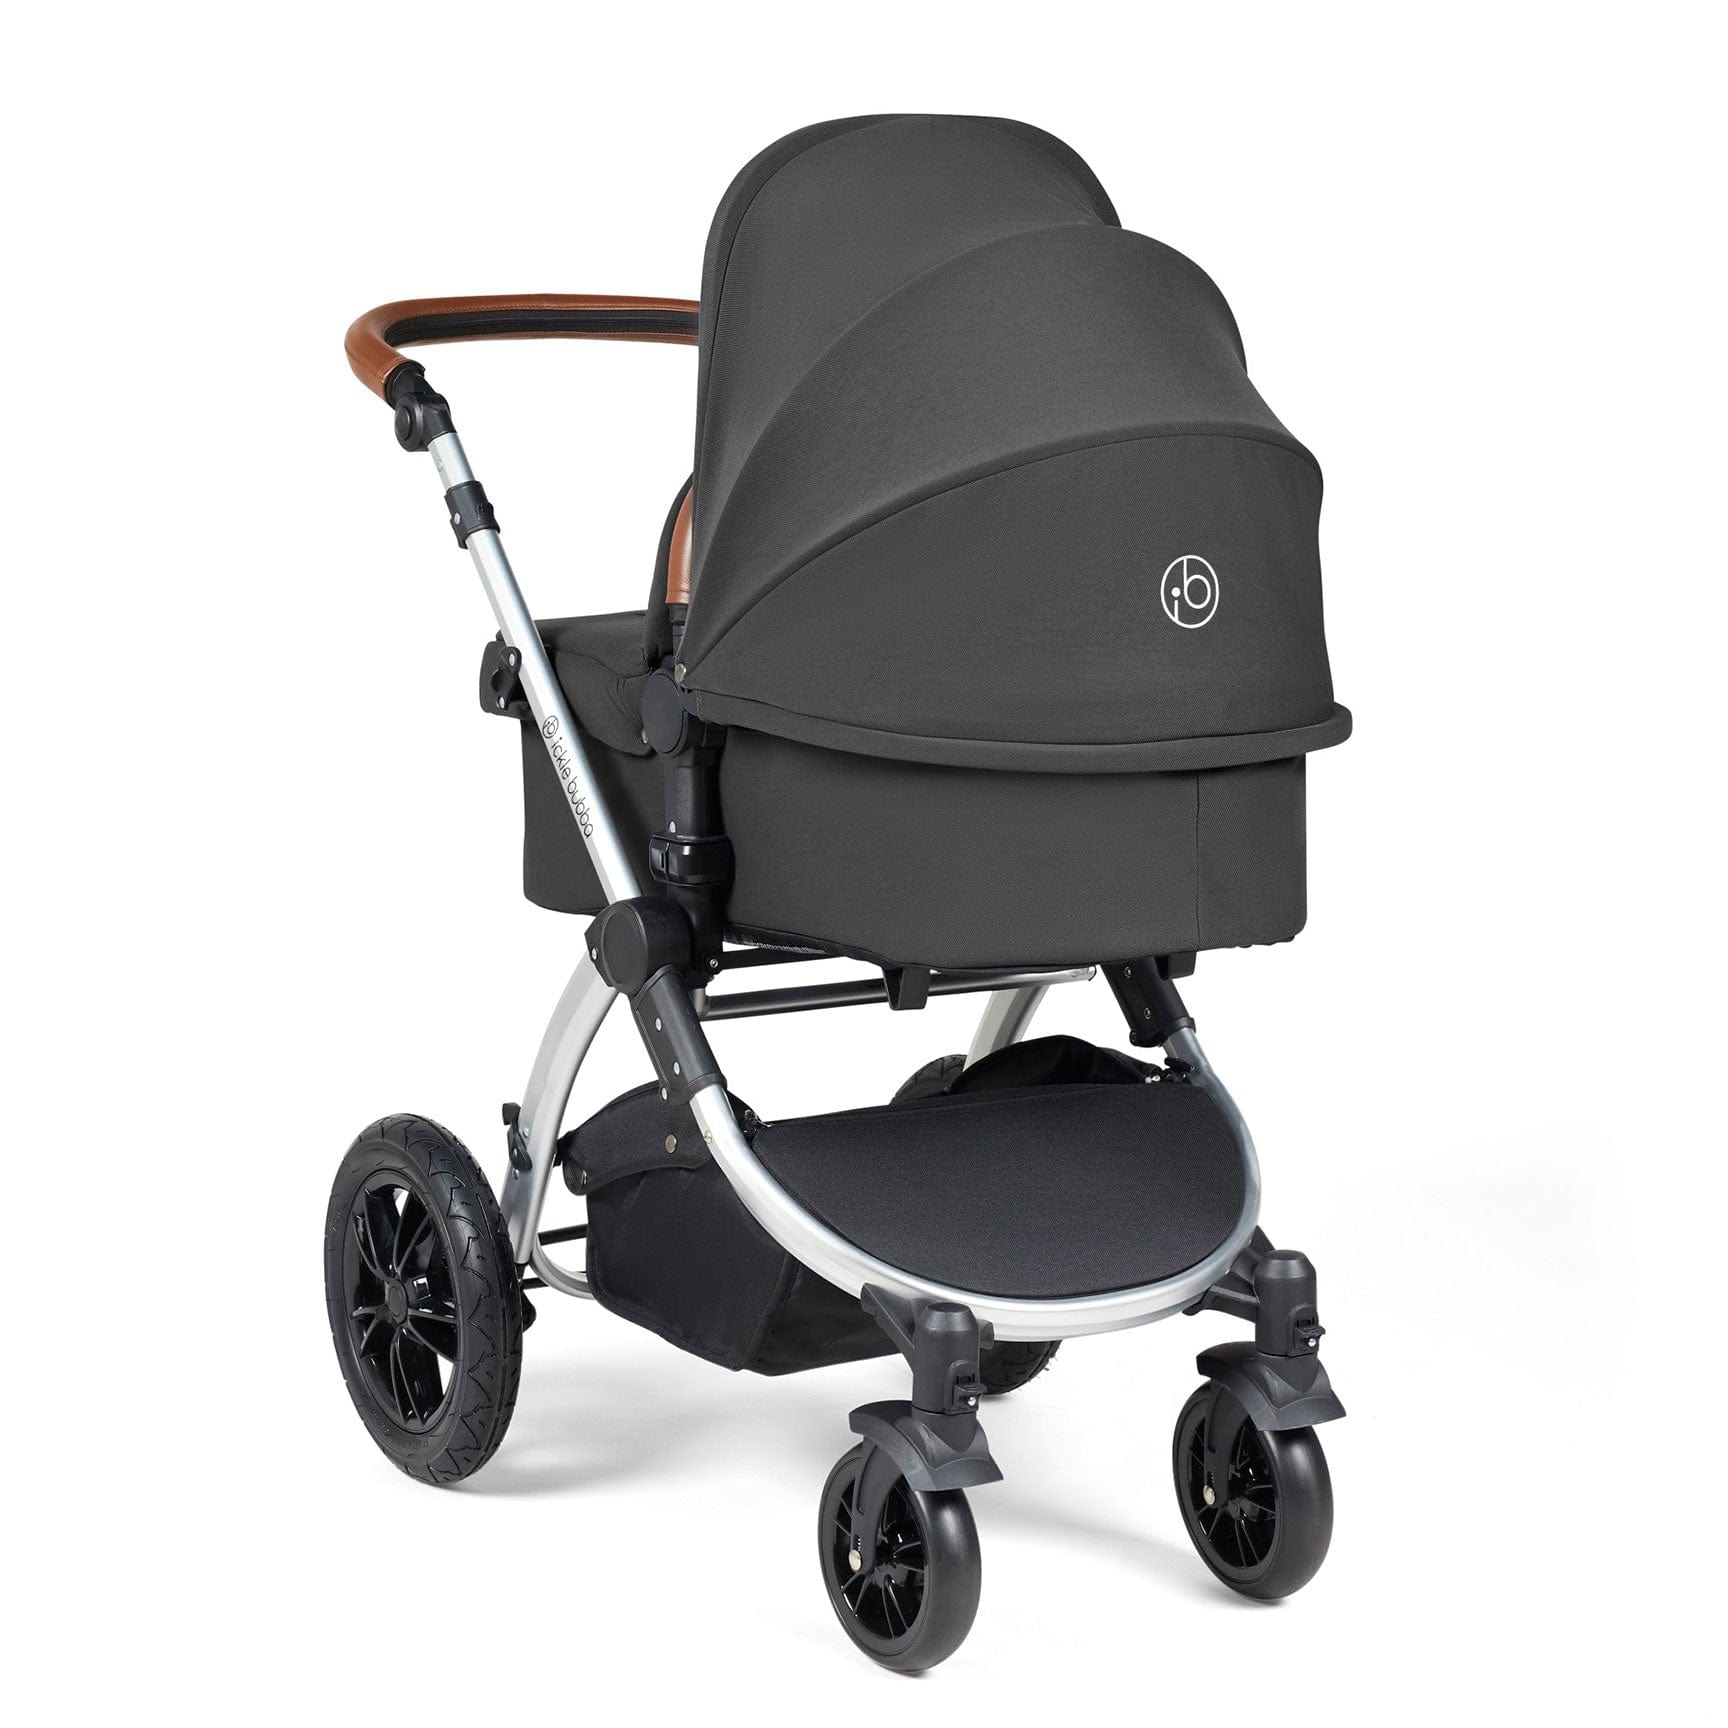 Ickle Bubba Stomp Luxe 2-in-1 Plus Pushchair & Carrycot in Silver/Charcoal Grey/Tan Travel Systems 10-003-001-255 5056515026306